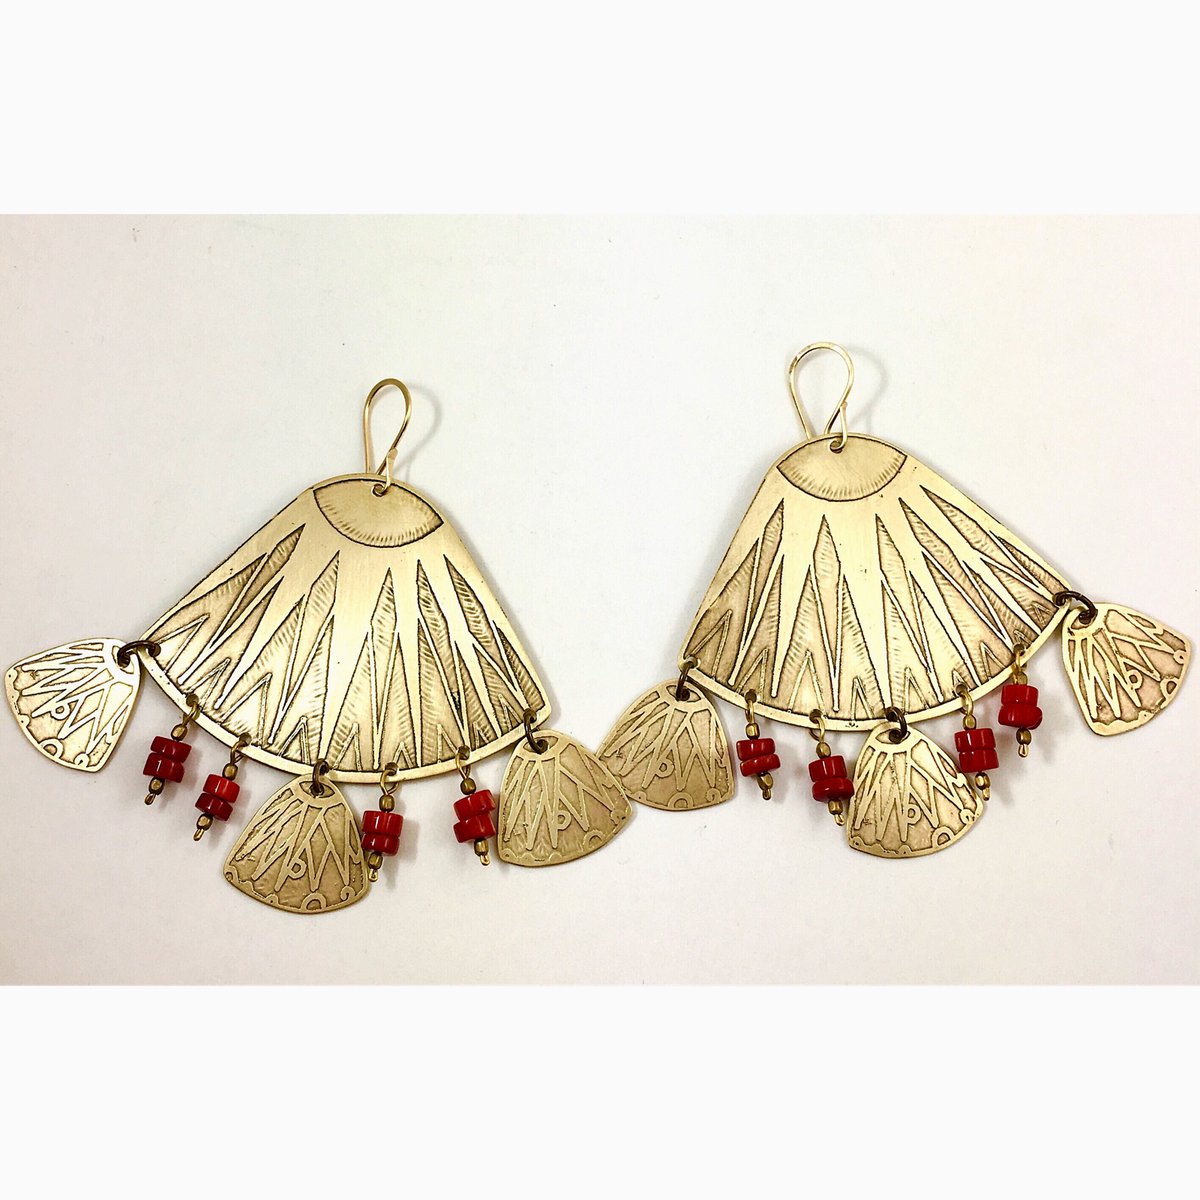 Image of Pattini Earrings with Coral